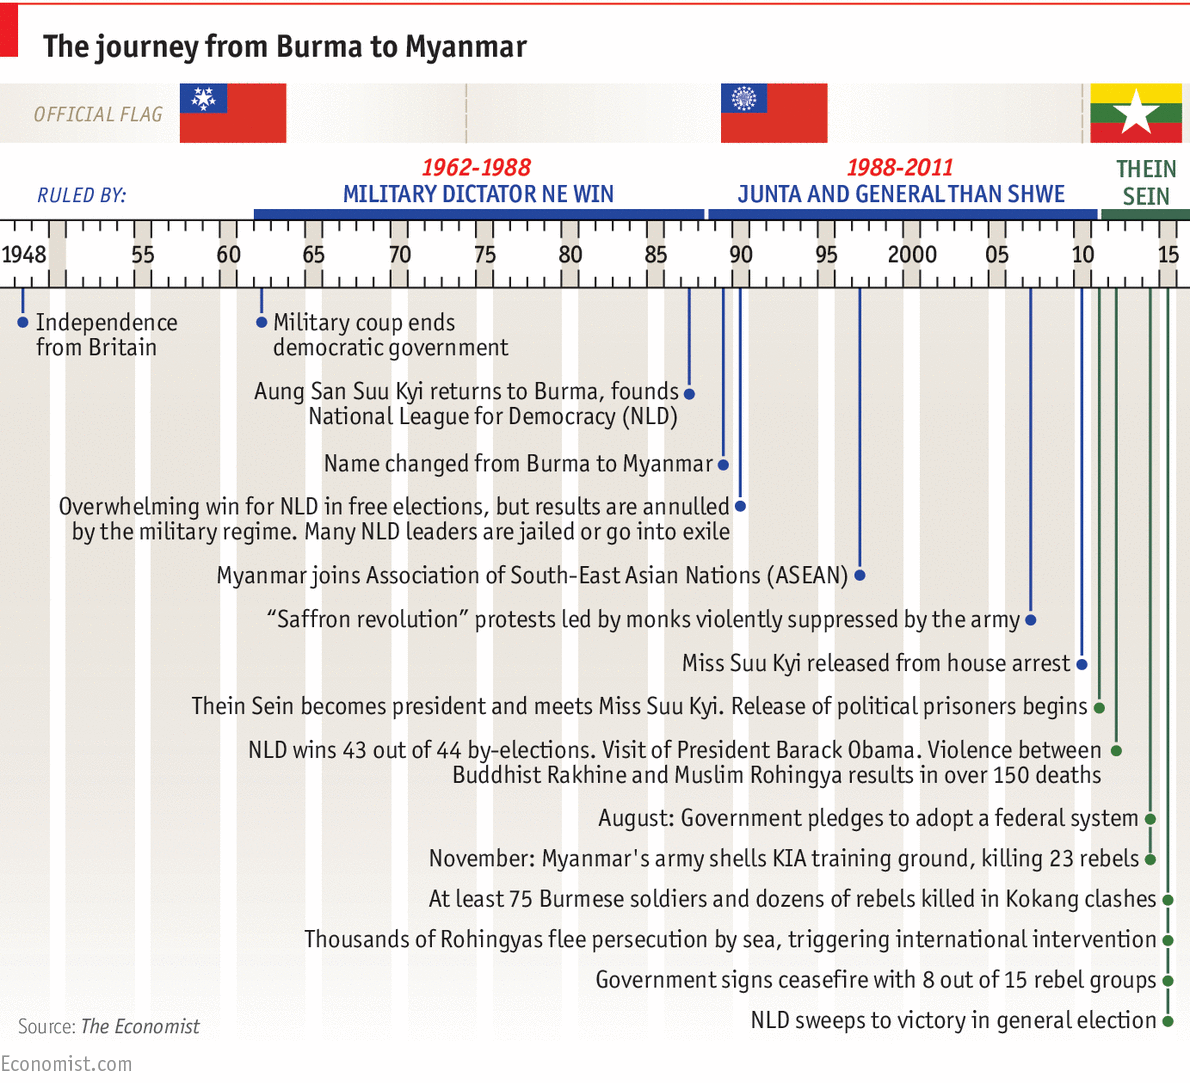 The journey from Burma to Myanmar.